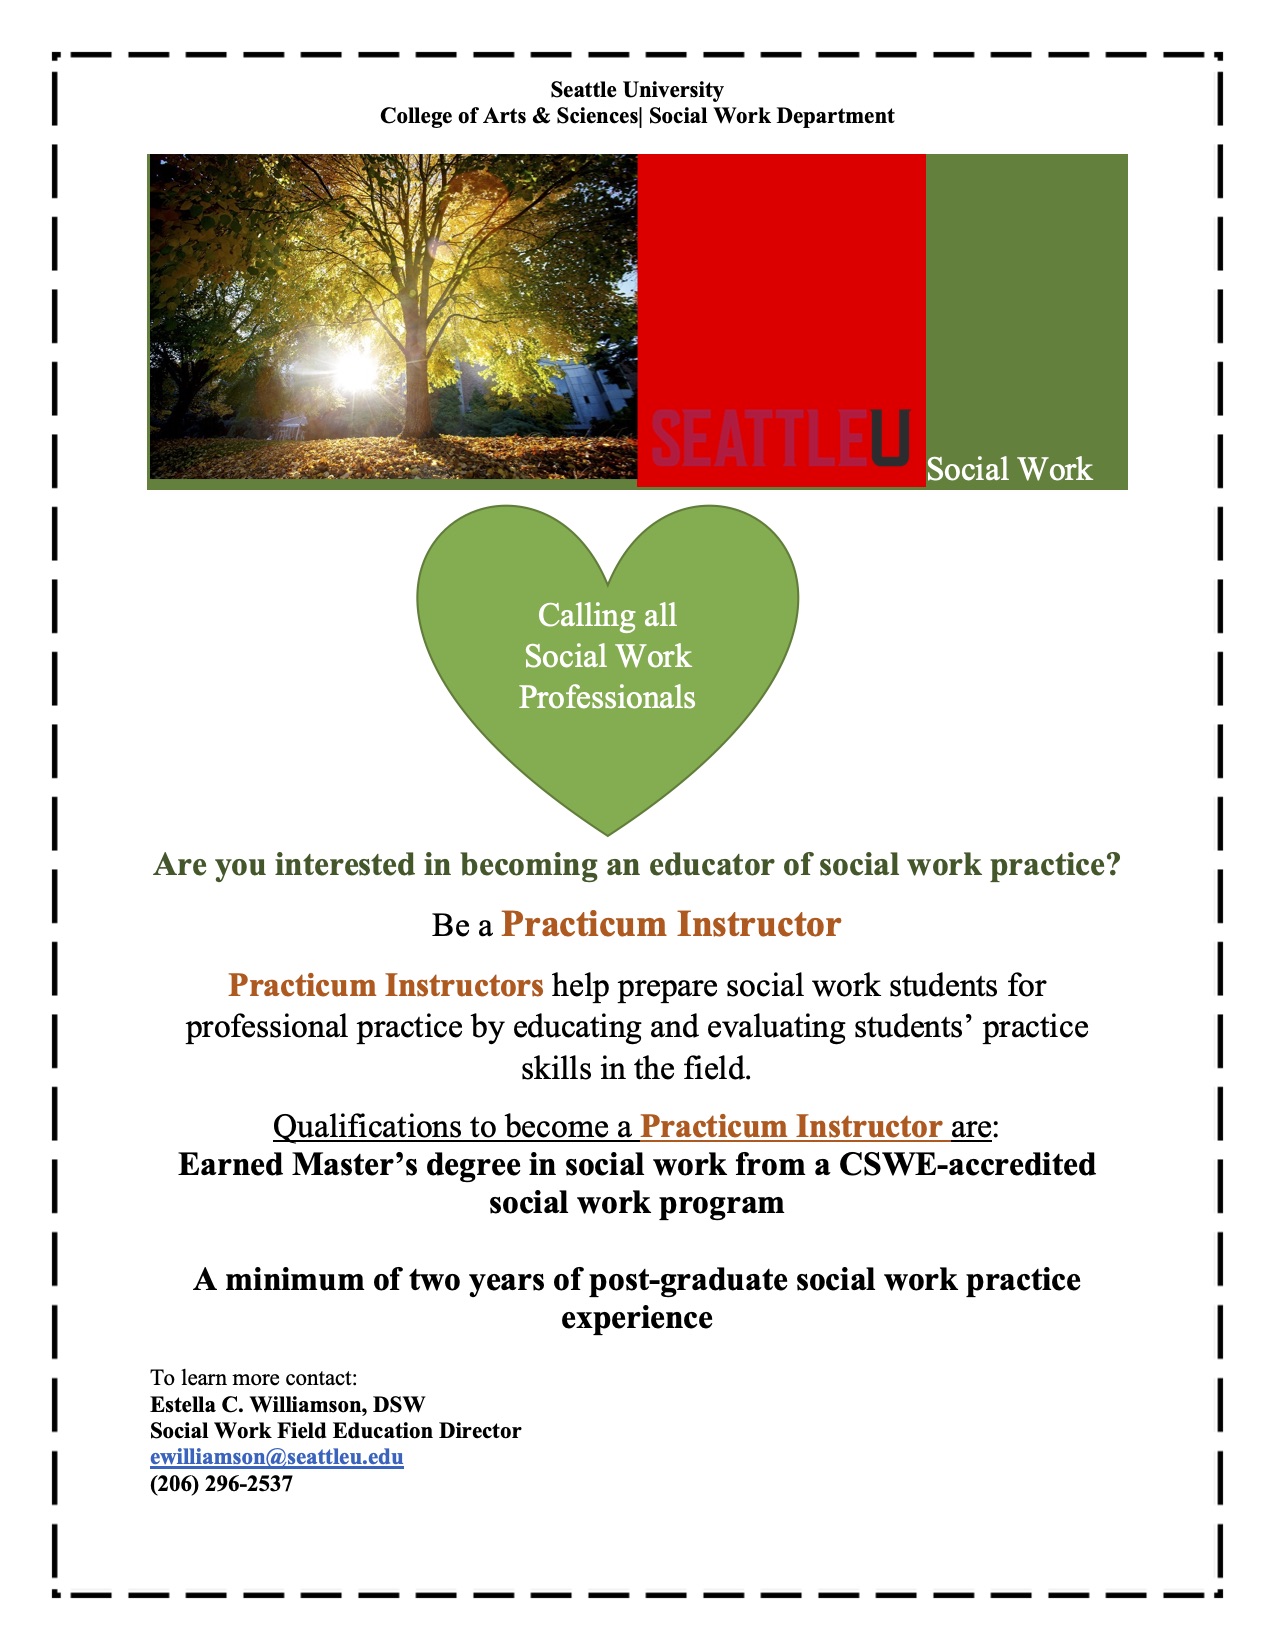 Practicum Instructor recruitment flyer-photo of a tree in fall at top of page. 